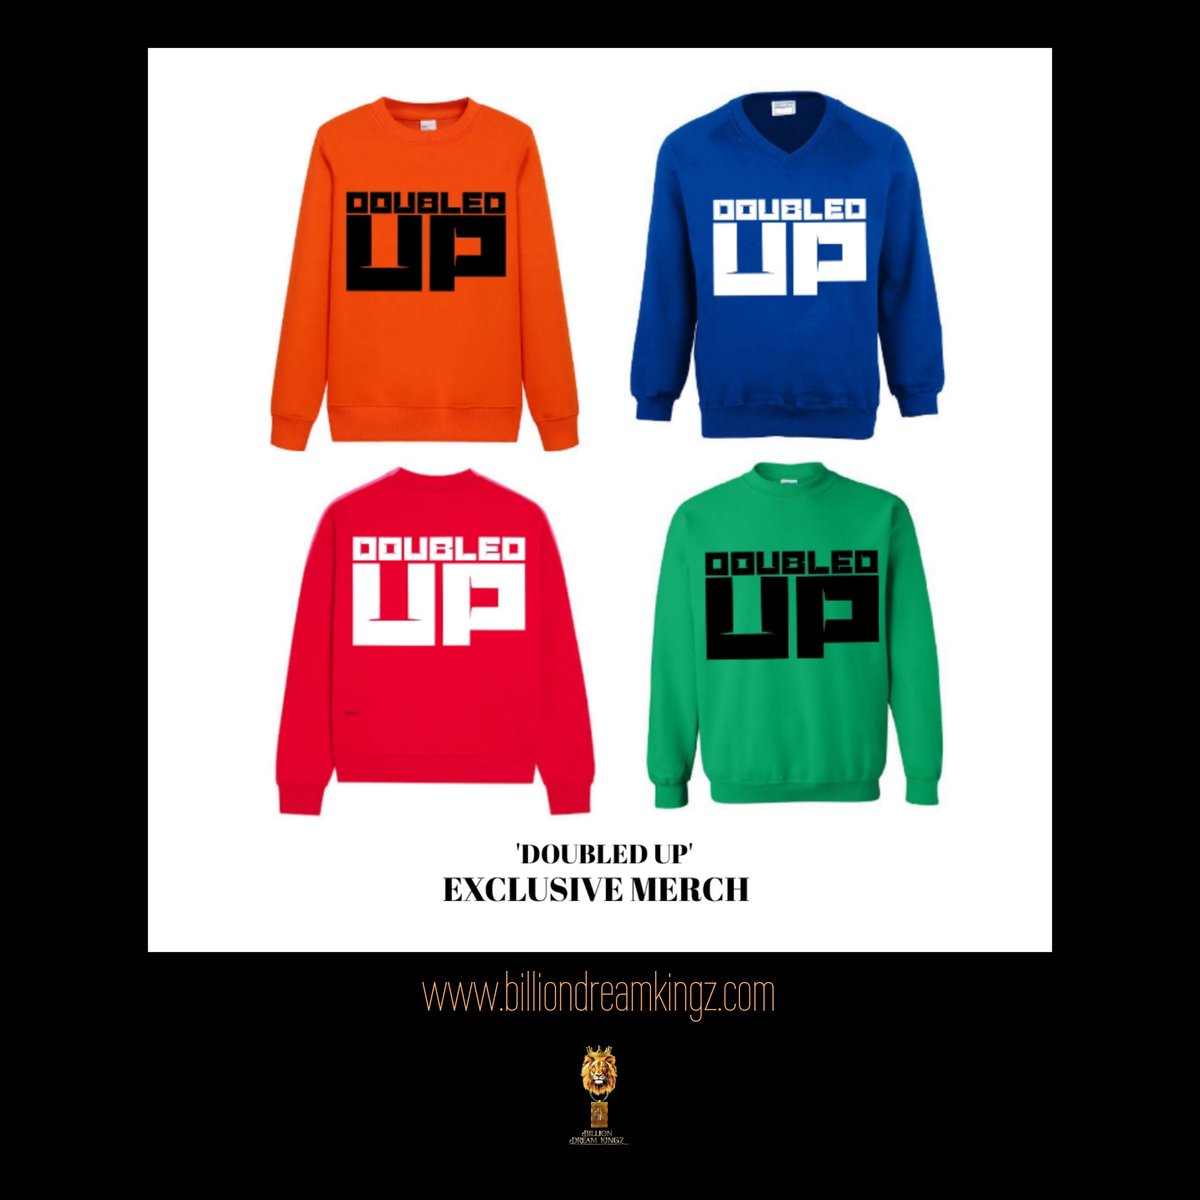 #DoubledUp Exclusive Anniversary Merches still Available and selling go #ShopNow 🙏🏽

Cc: @bdk_kingz